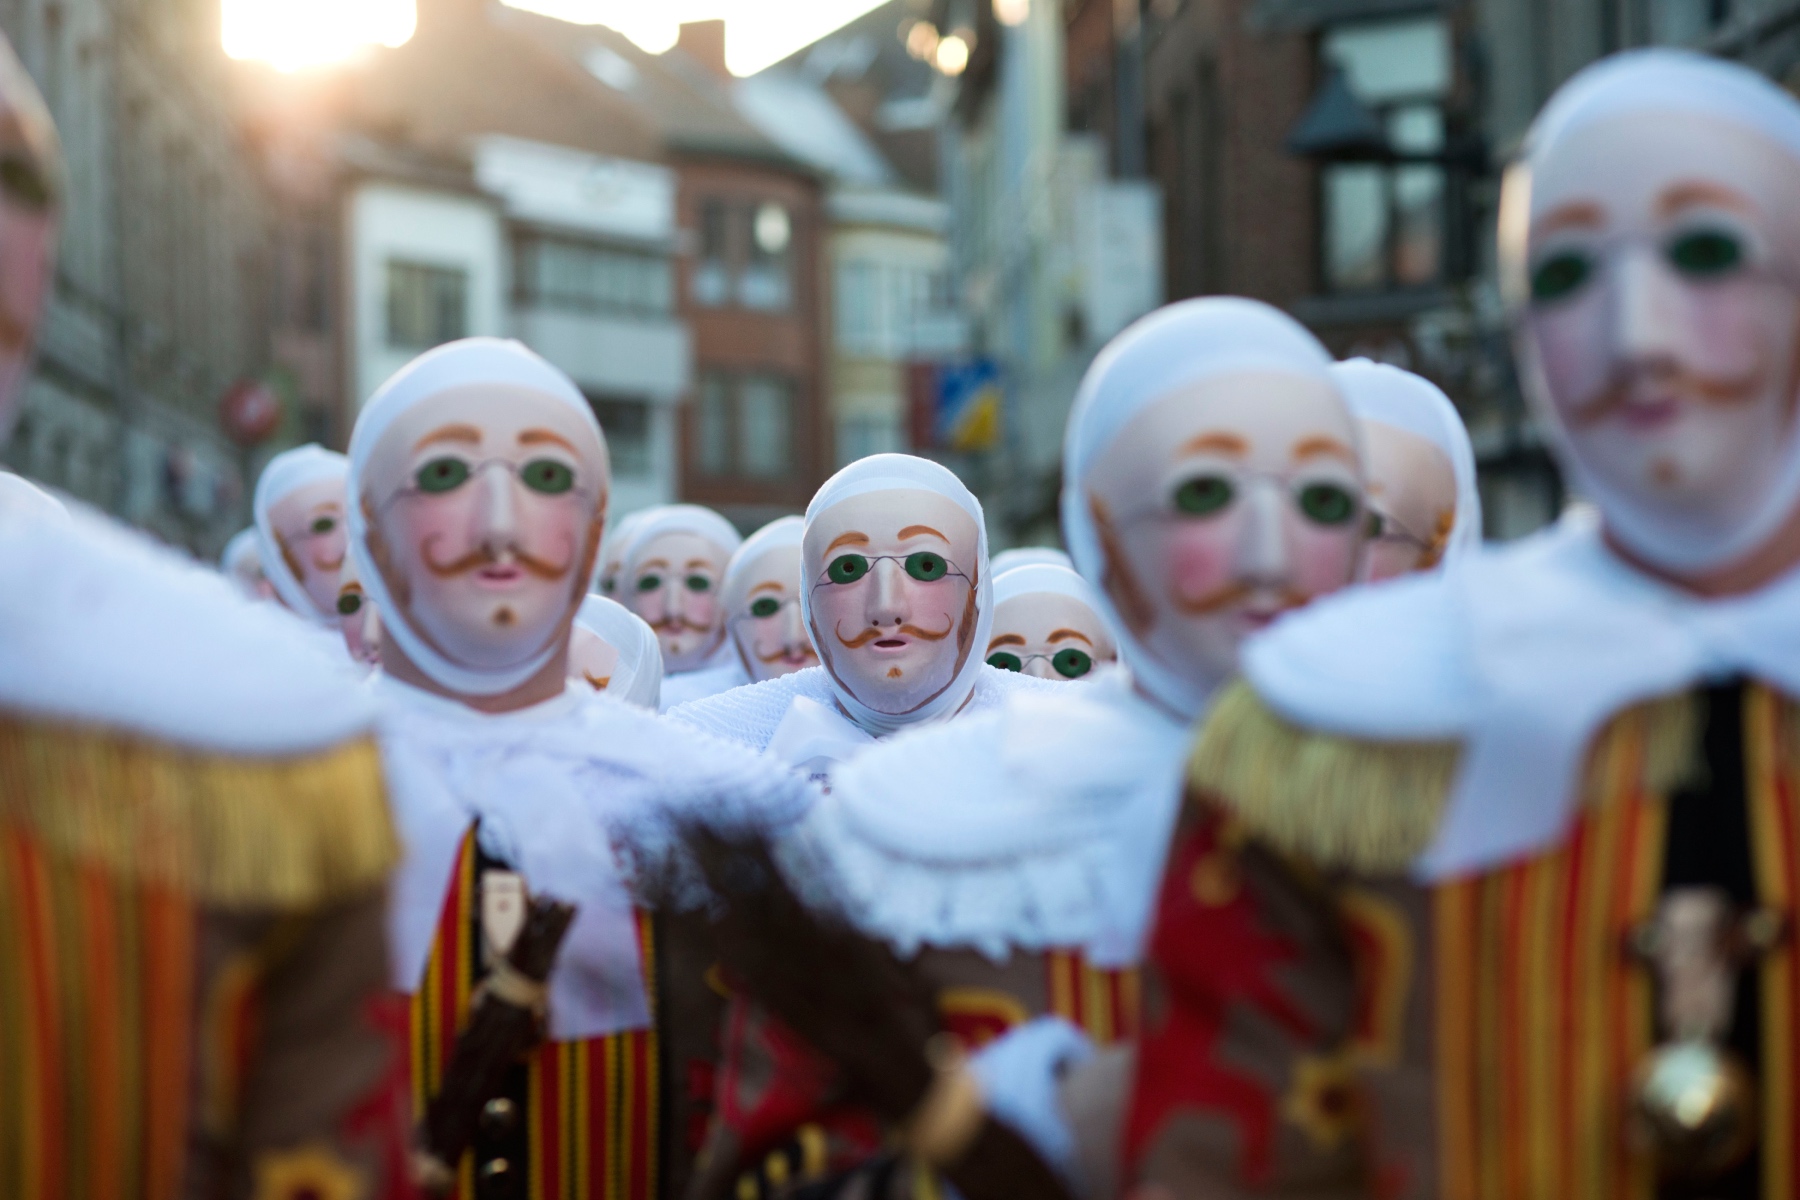 Men wearing traditional masks and costumes stands together during Carnaval de Binche celebrations in Brussels